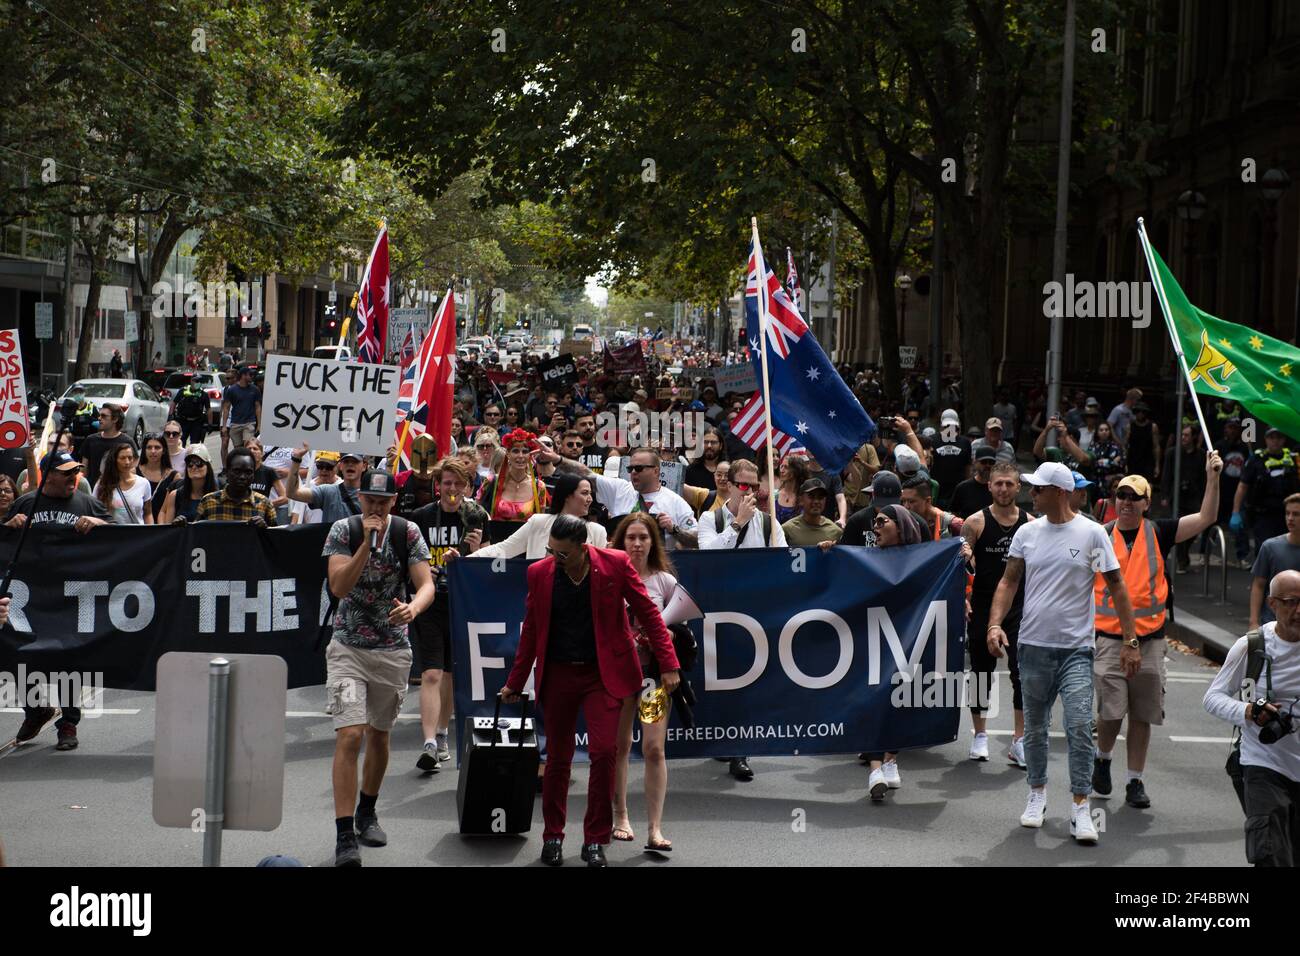 Melbourne, Australia 20 March 2021, Marchers take to the streets at the Freedom Rally which was part of a demonstration of the planned 'World Wide Rally for Freedom' that was organised to call for freedom of choice, speech and movement. Credit: Michael Currie/Alamy Live News Stock Photo